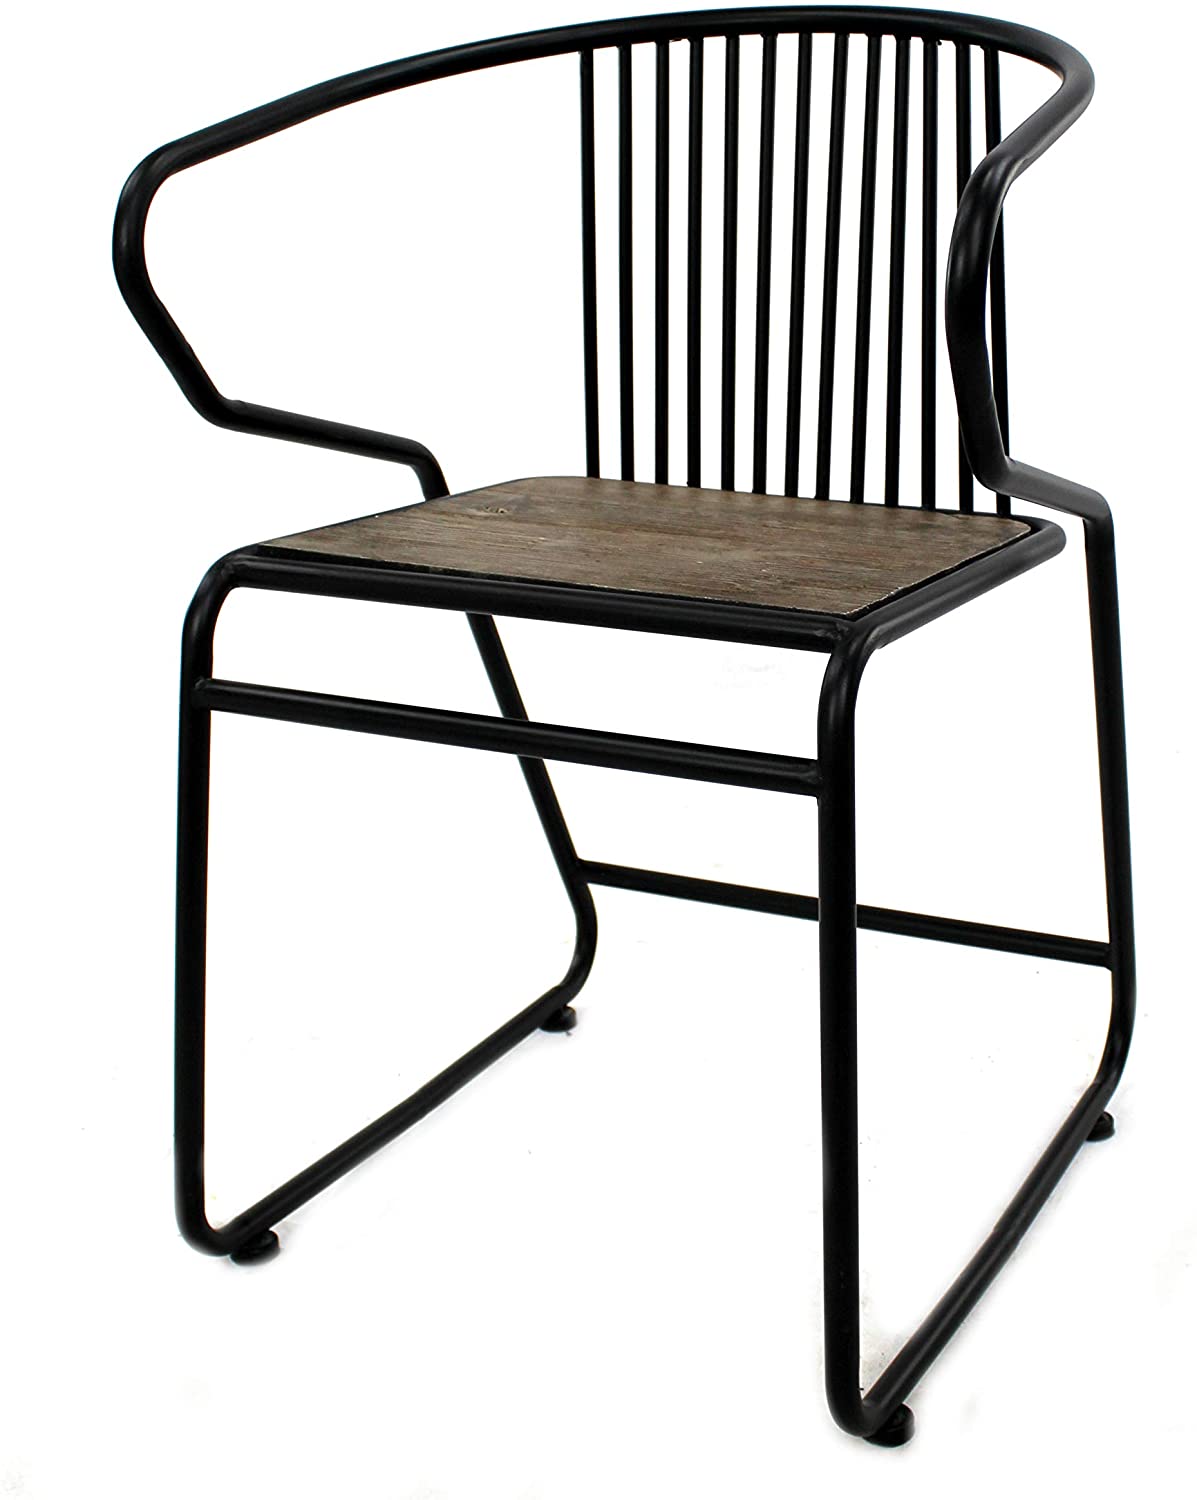 Daro Decorative Metal Chair With Top In Wood Look 54 X 81Cm